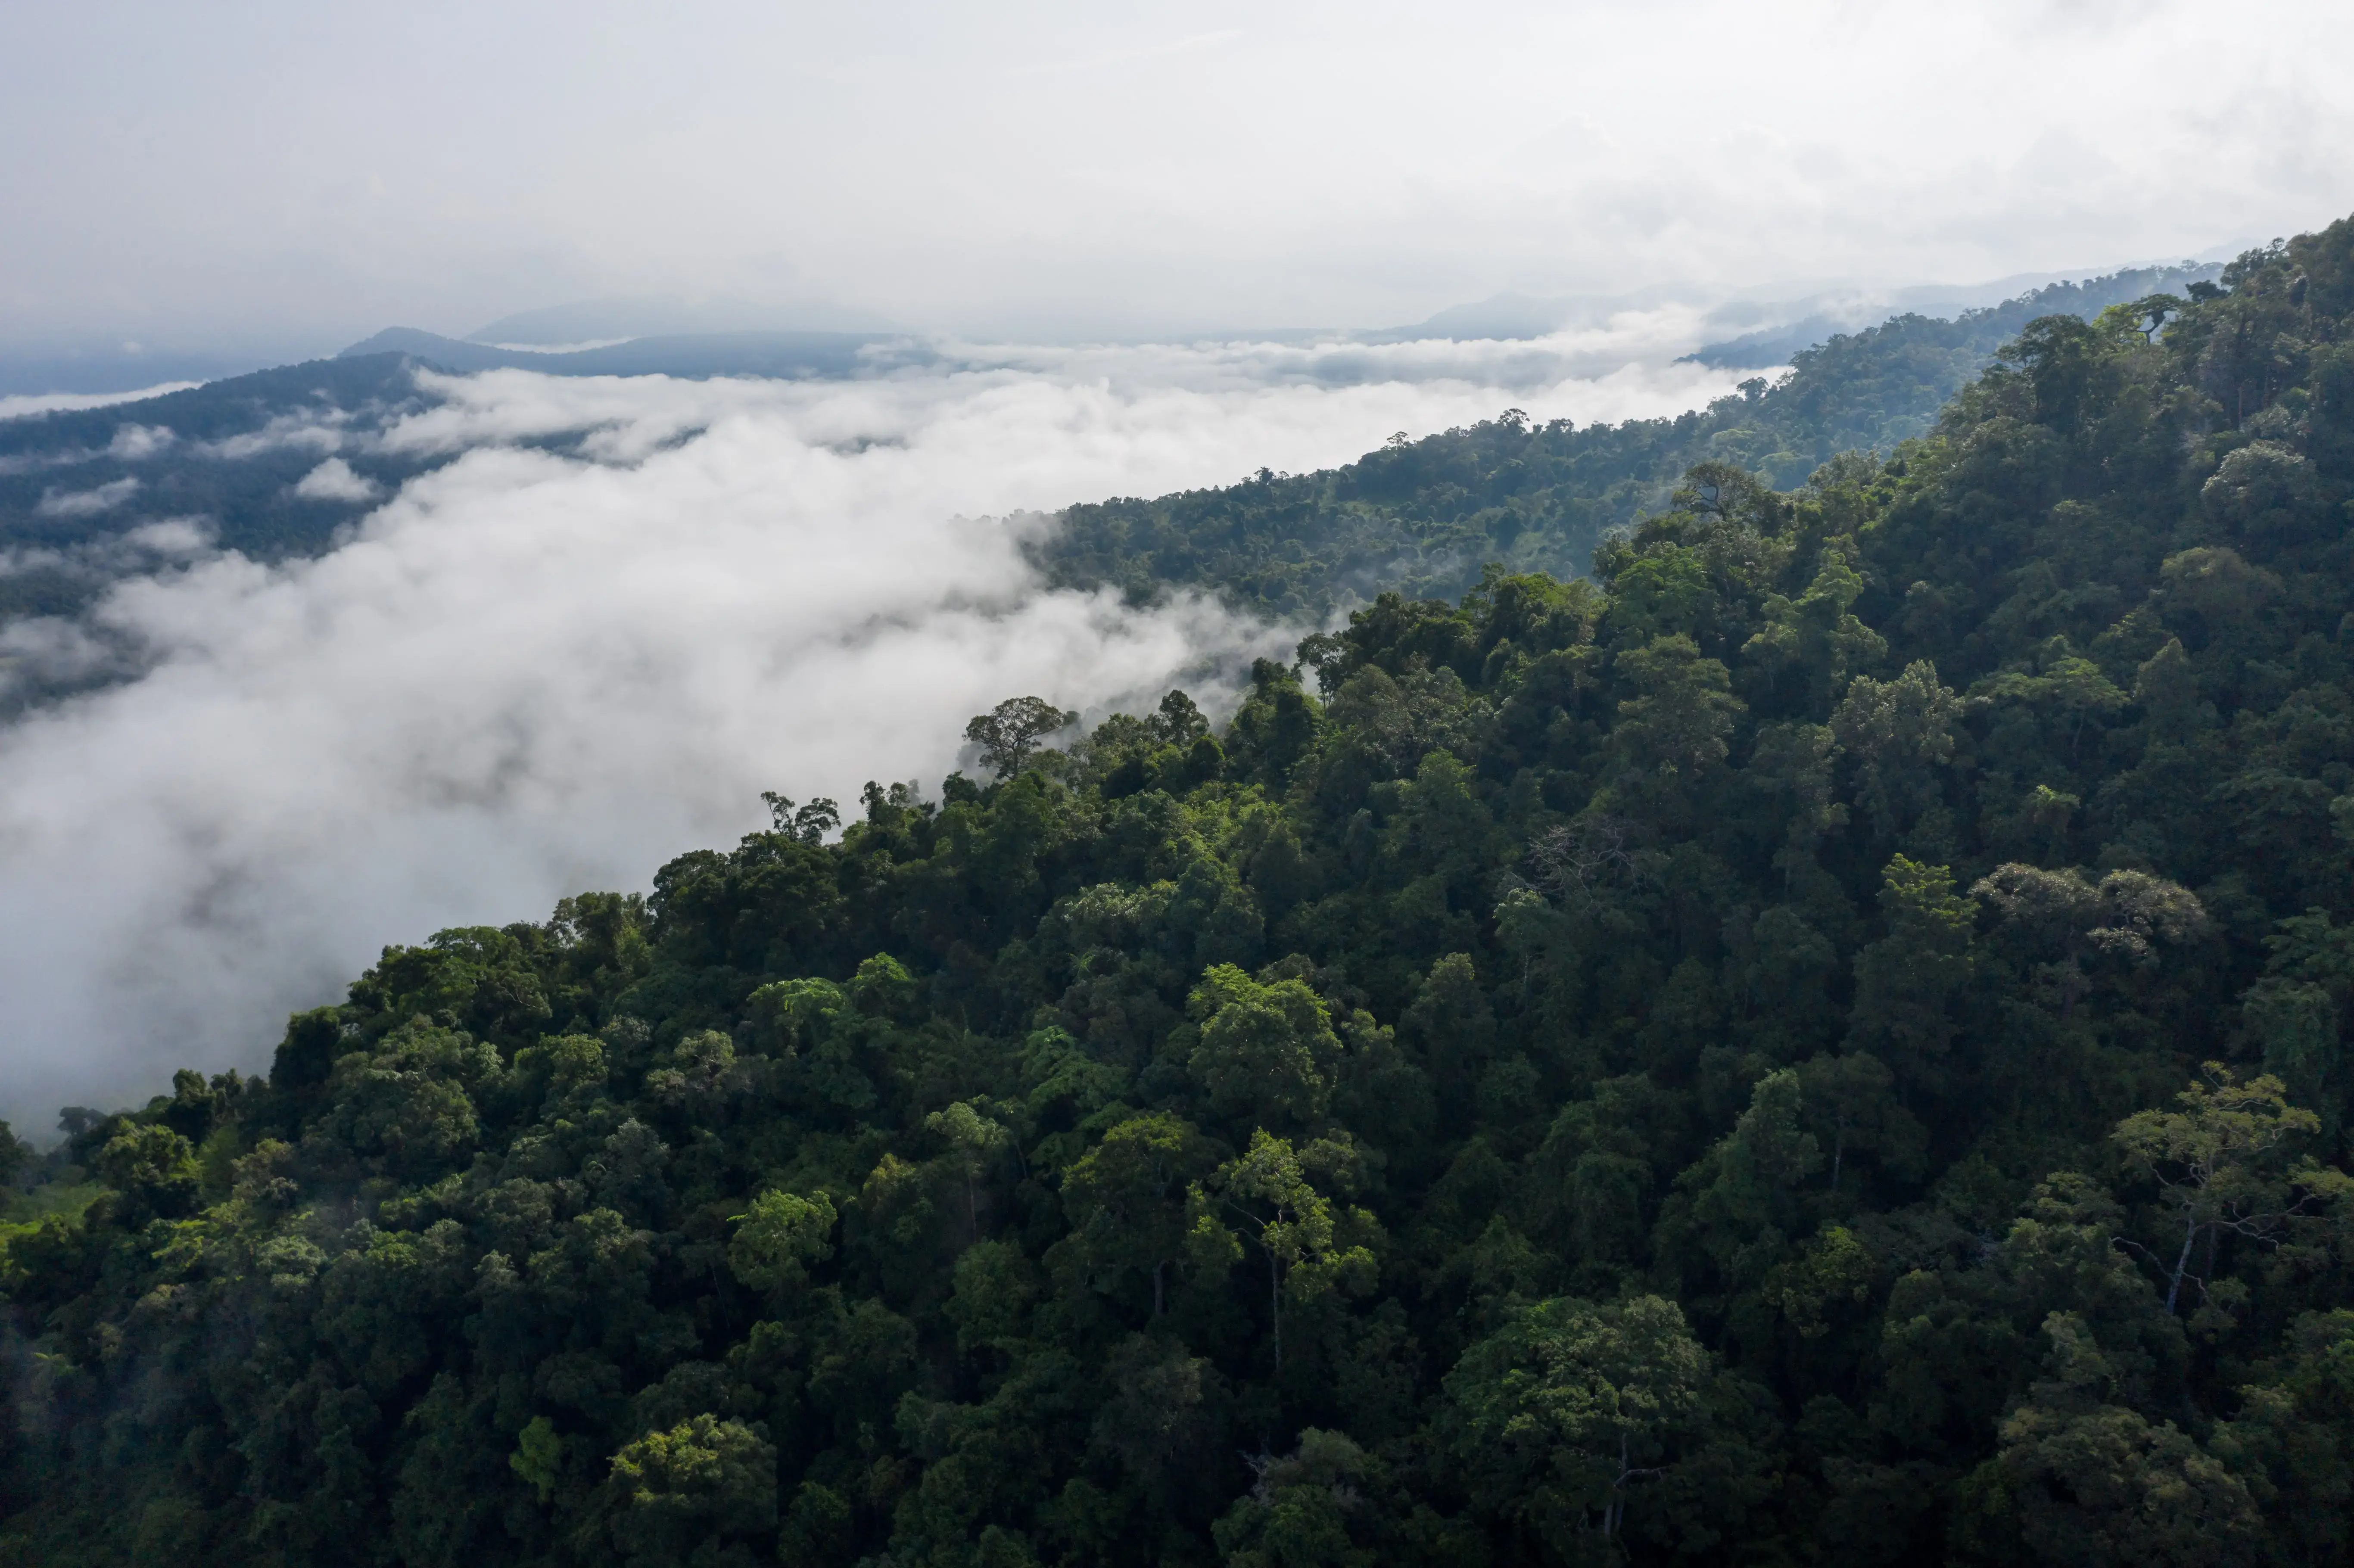 An aerial view over the Central Cardamoms National Park, one of several protected areas that constitute the Cardamom Mountains, an evergreen forest situated on the Thai-Cambodia border. In November 2021, construction began on the nearby 150-megawatt Stung Tatai Leu hydropower dam. Credit: Andy Ball/Mongabay.